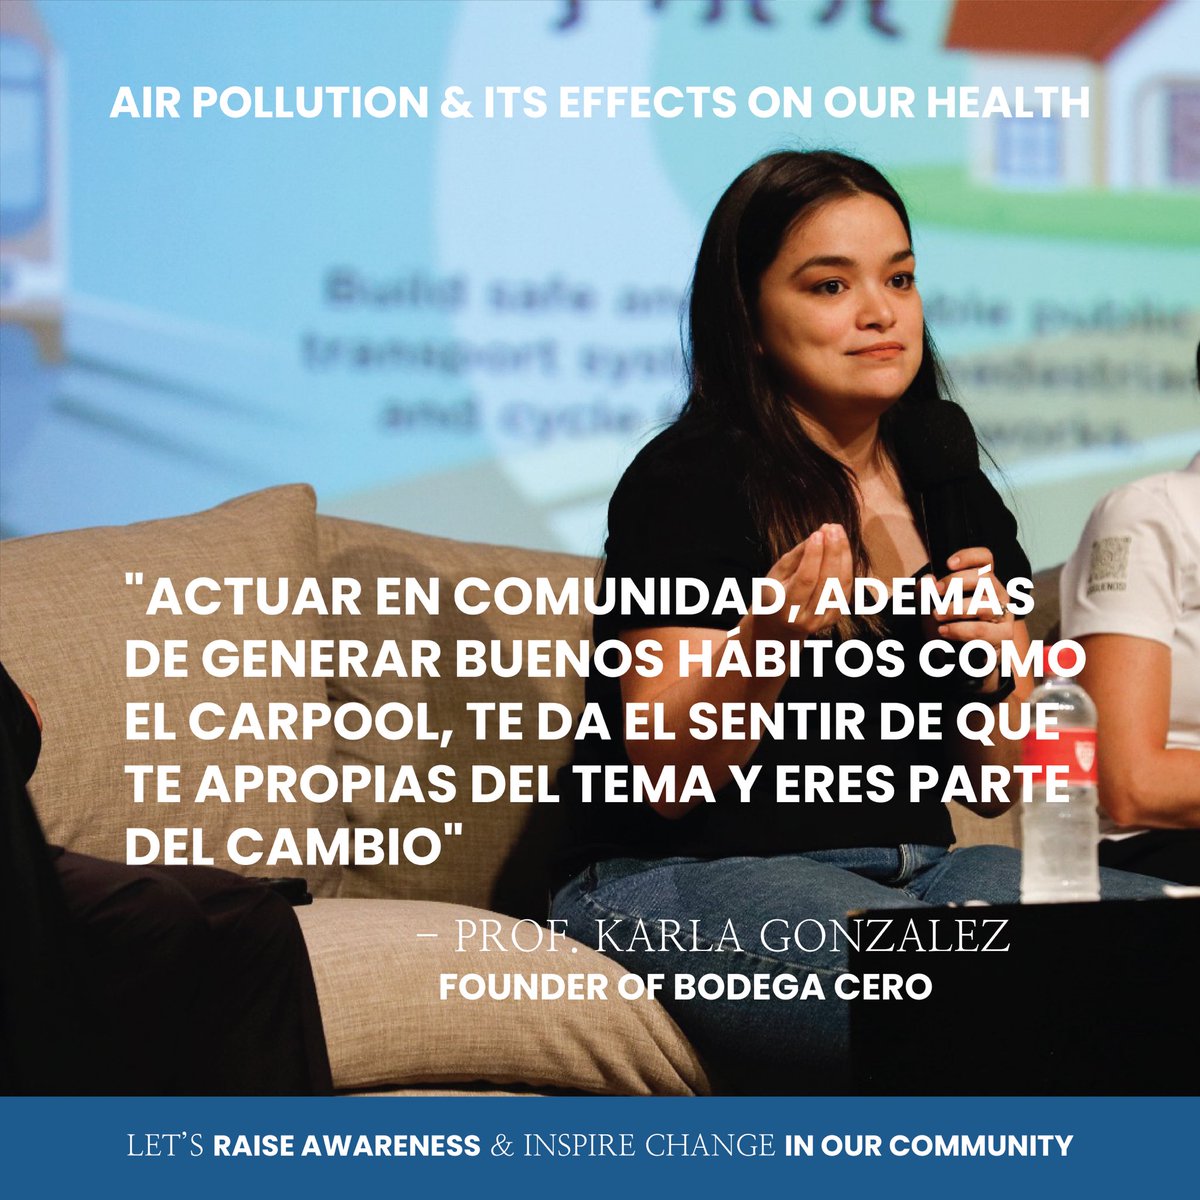 Last week, ASFM held the conference: Air Pollution & Its Effects On Our Health. We had experts share important information regarding this topic, and we want to share some of that information with you! #asfmeagles #togetherwerise #gobeyond